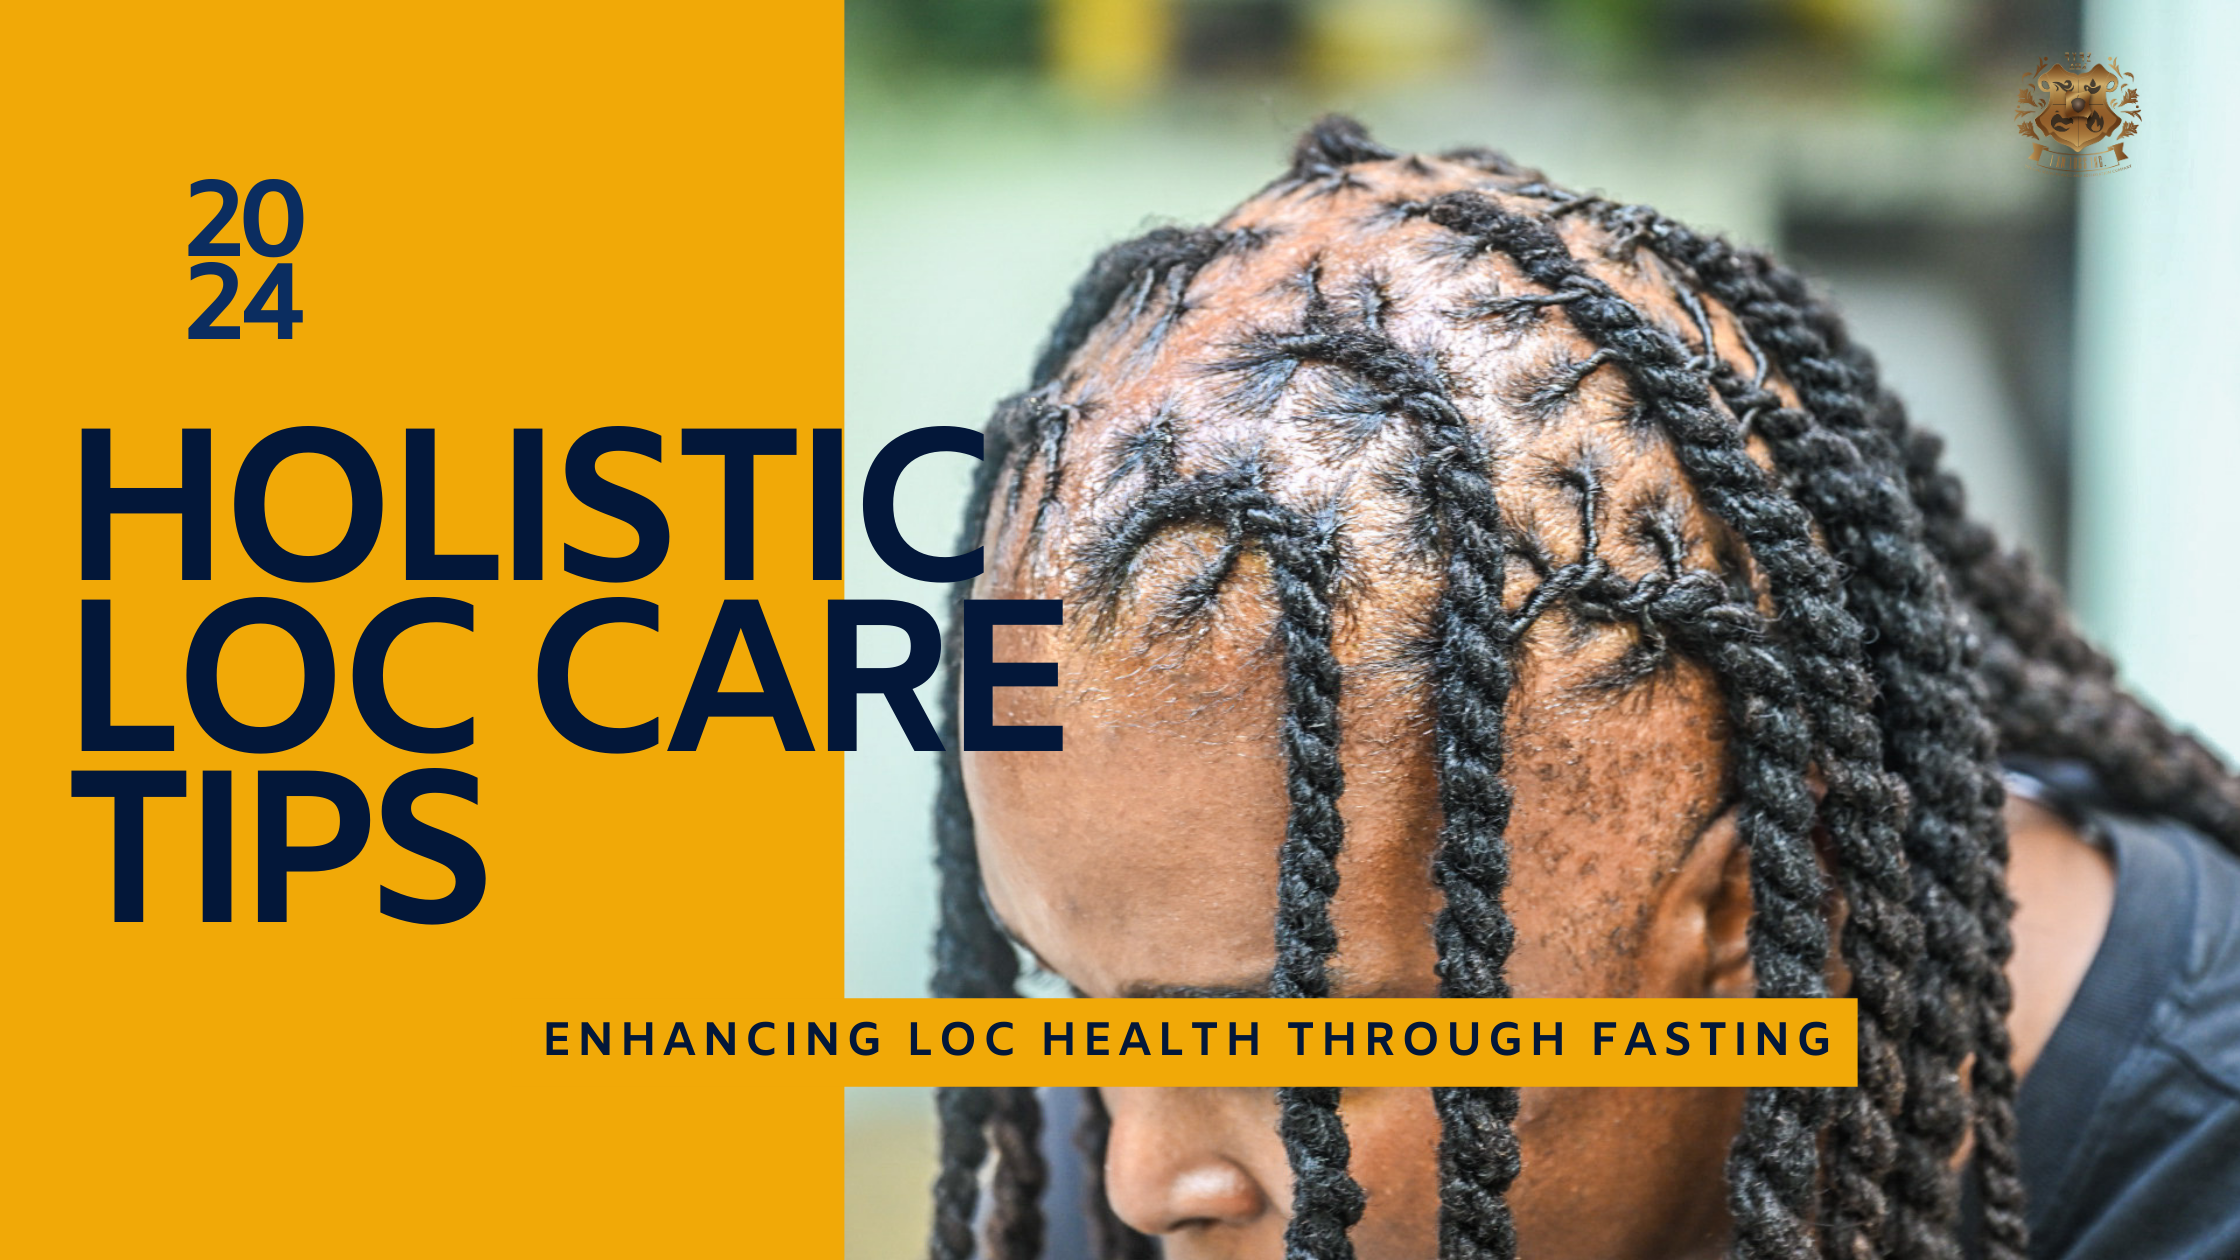 I AM LOCS Etheric Law School Explore the transformative benefits of fasting for loc health in our comprehensive guide.